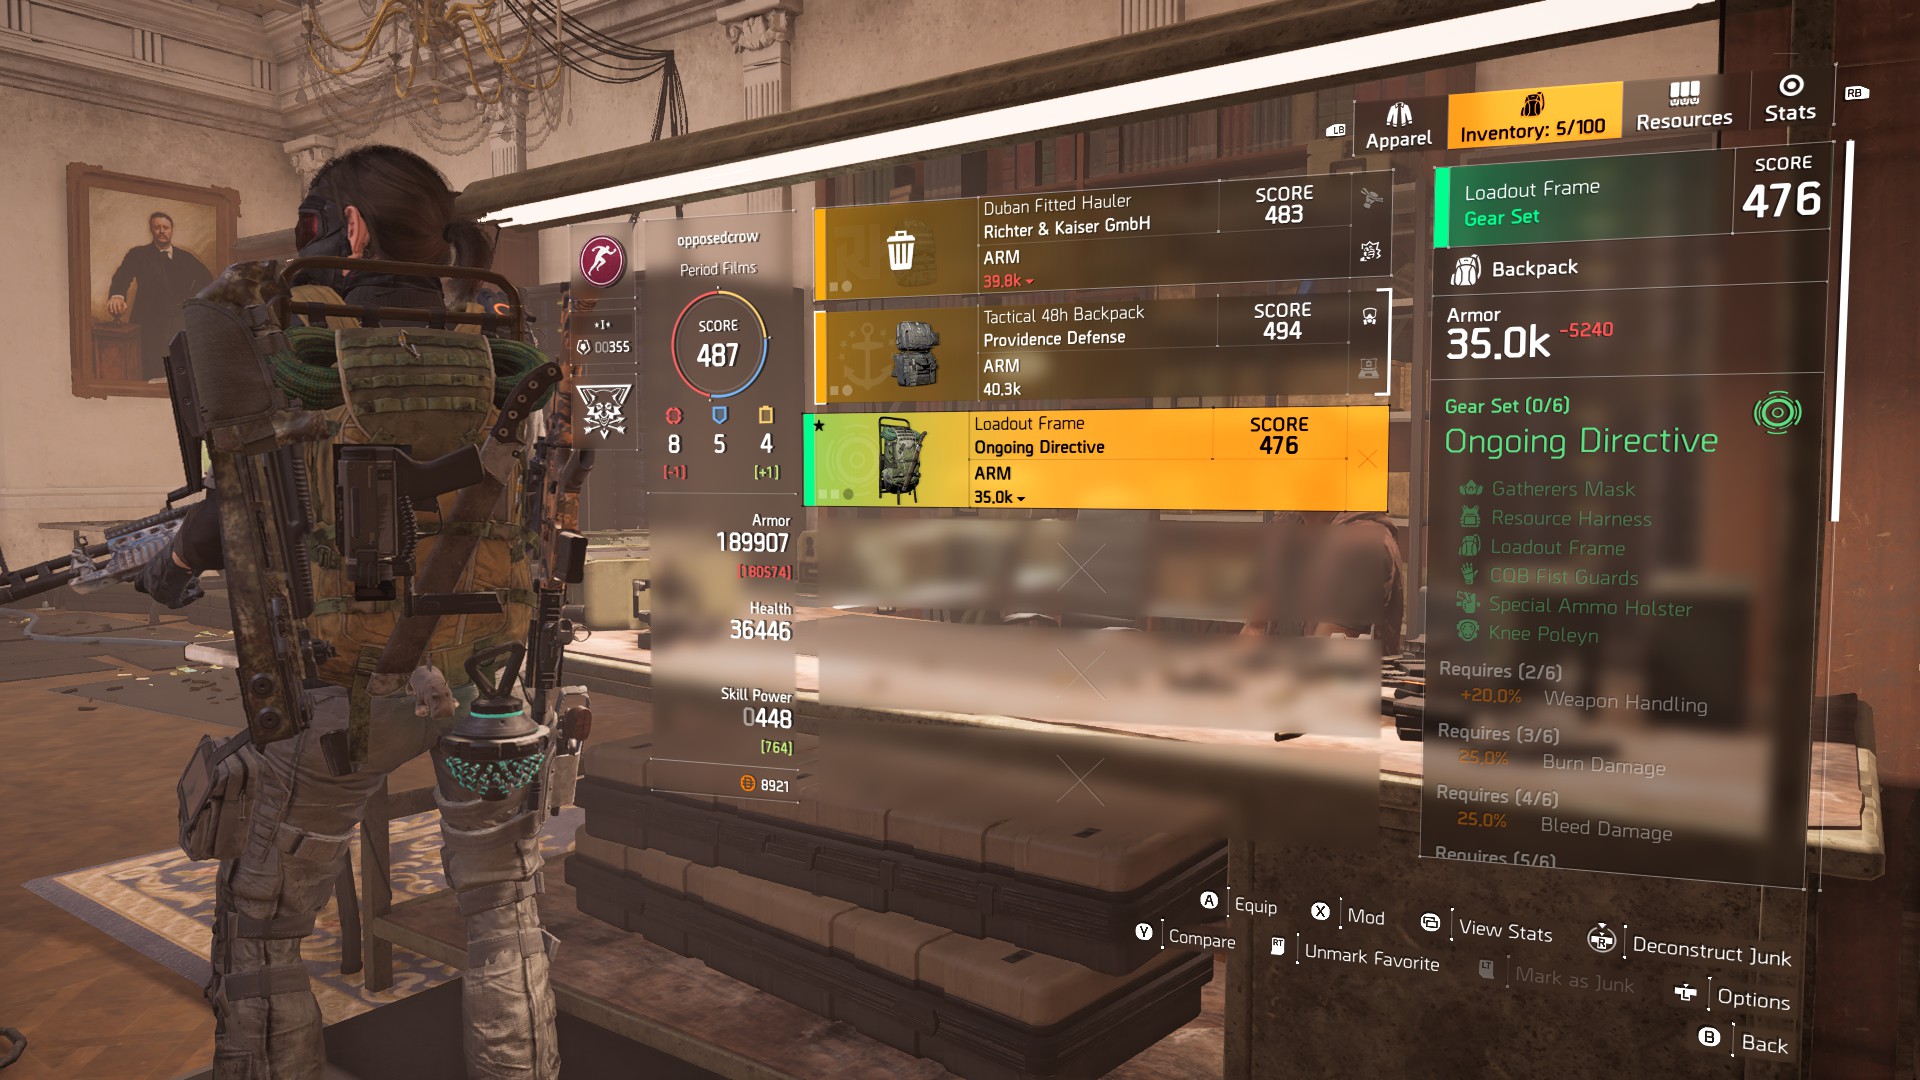 The Division 2 gear sets guide